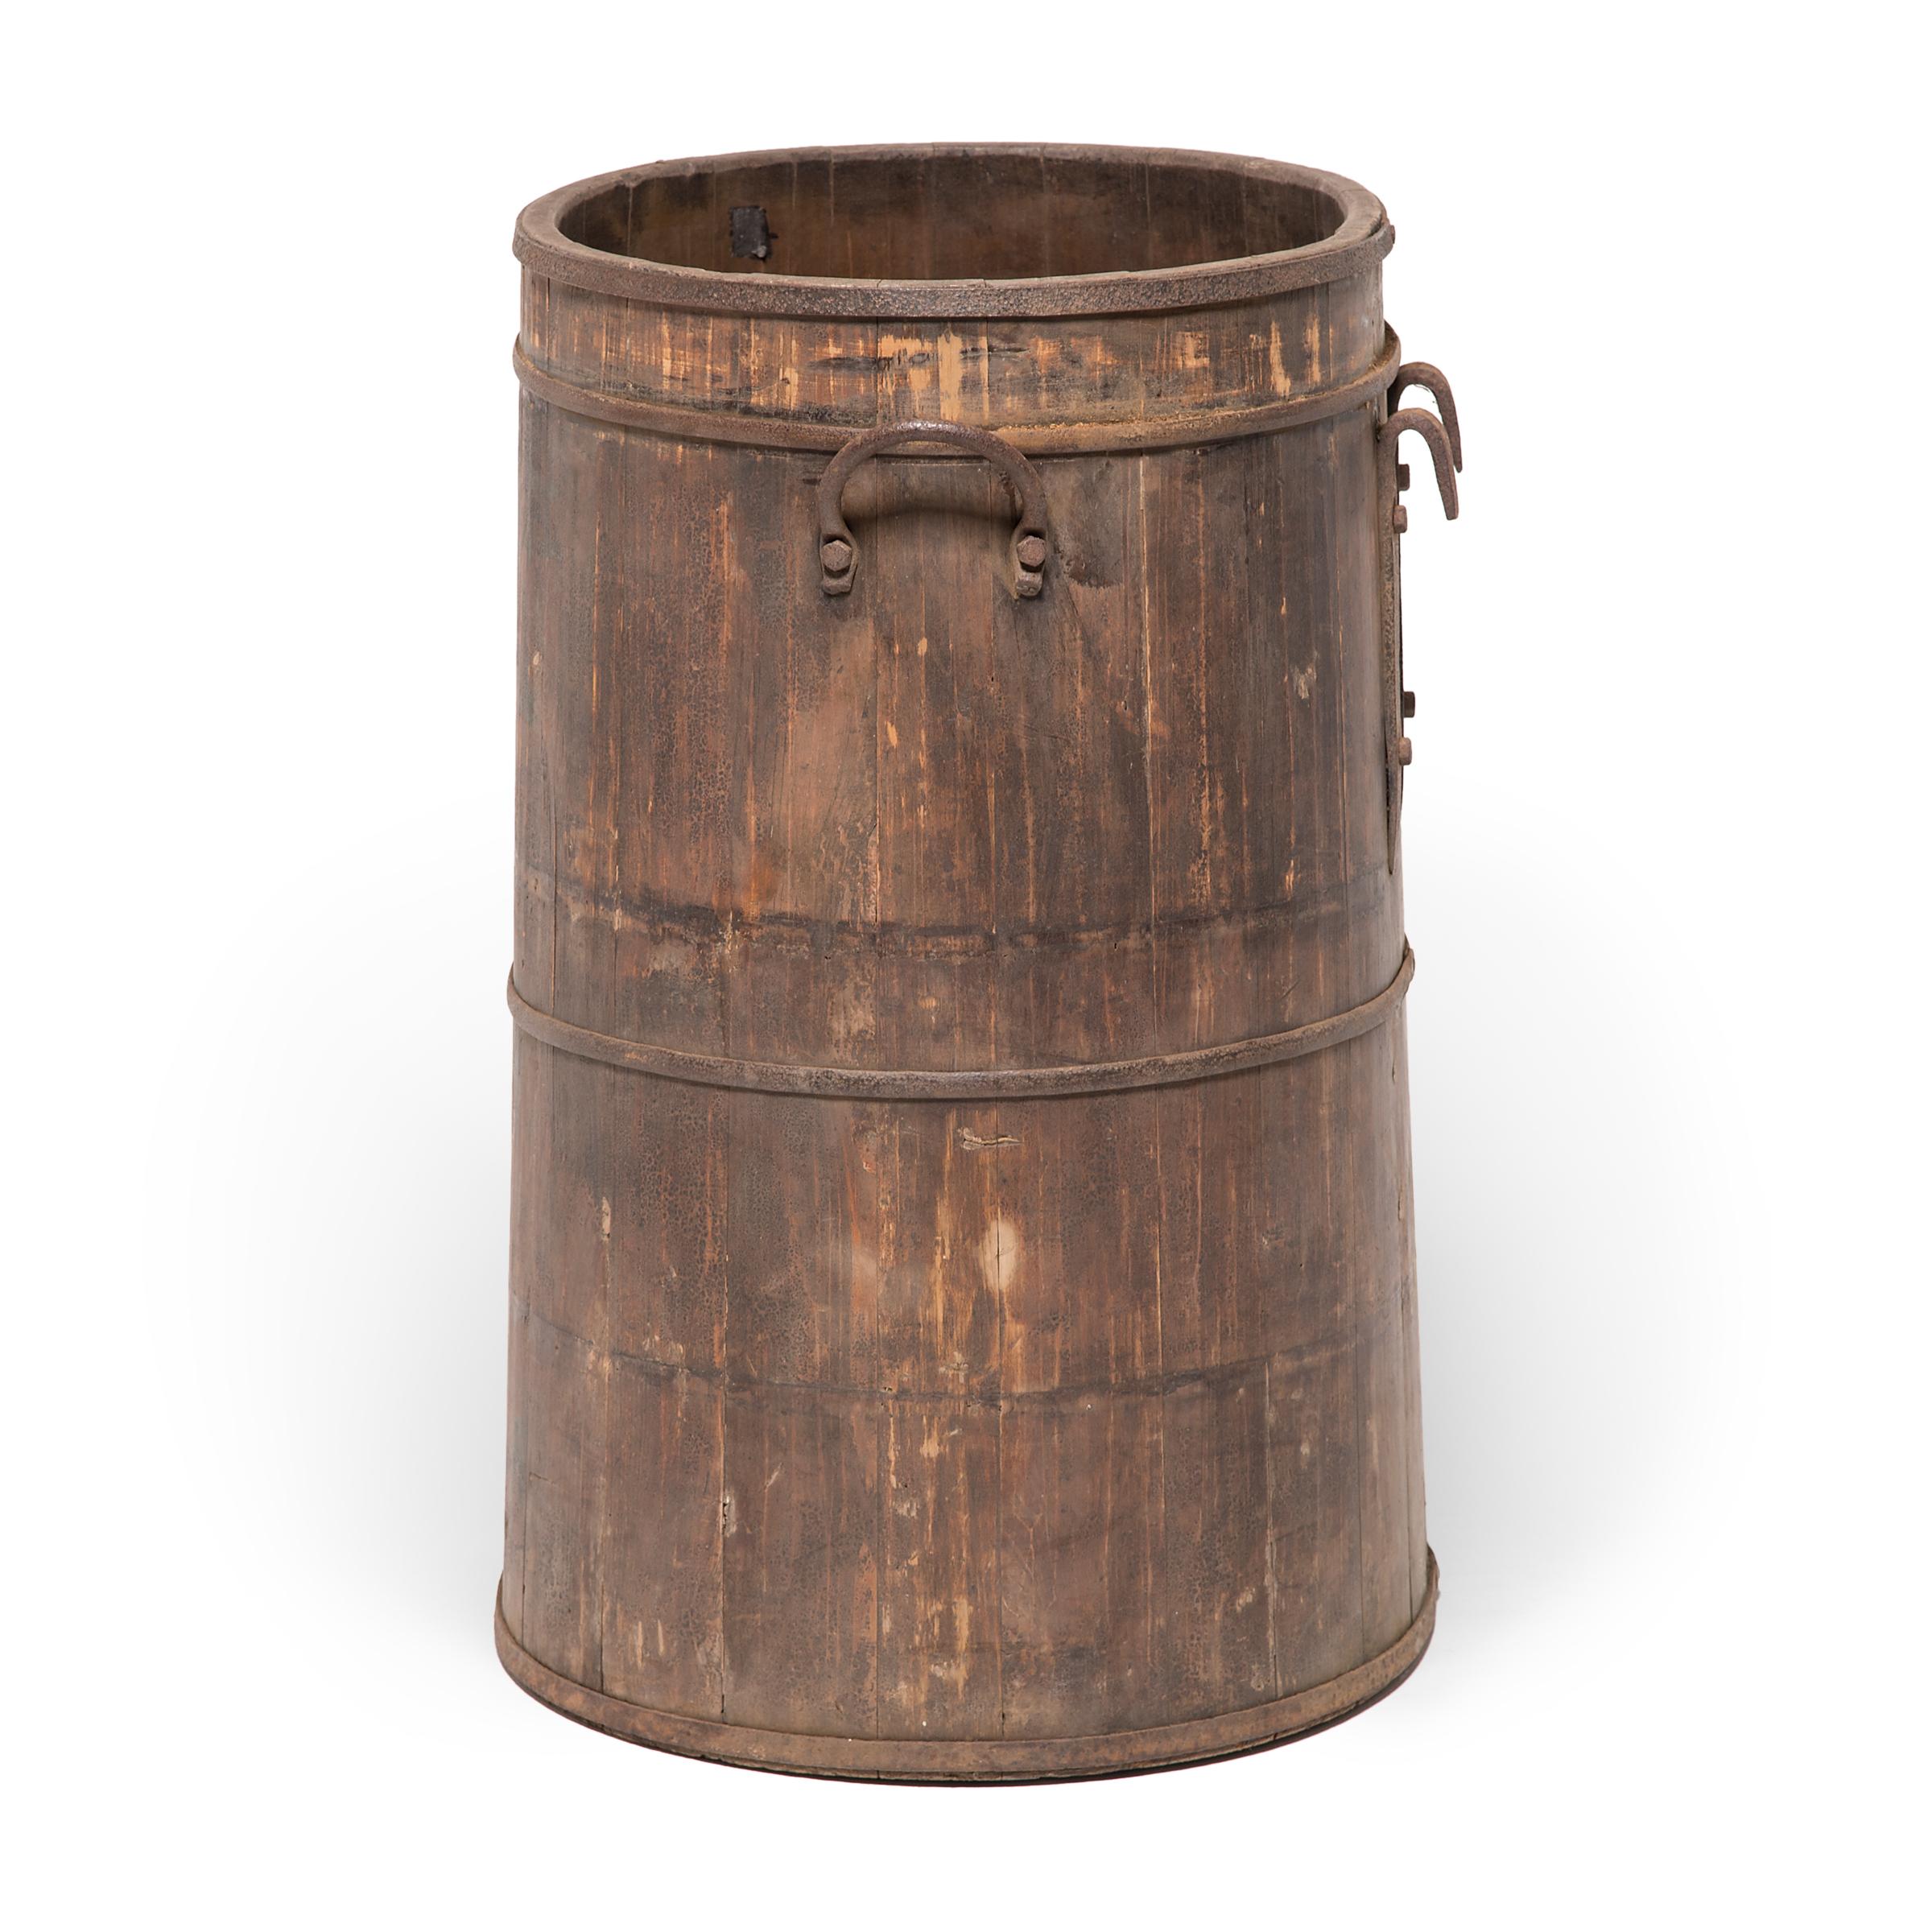 The beautifully aged surface of this Provincial water barrel is a testament to time and use. The barrel's finely joined wooden slats are held together by hand-smithed iron bands and cloaked in a layer of lacquer with a crackled finish. Chinese